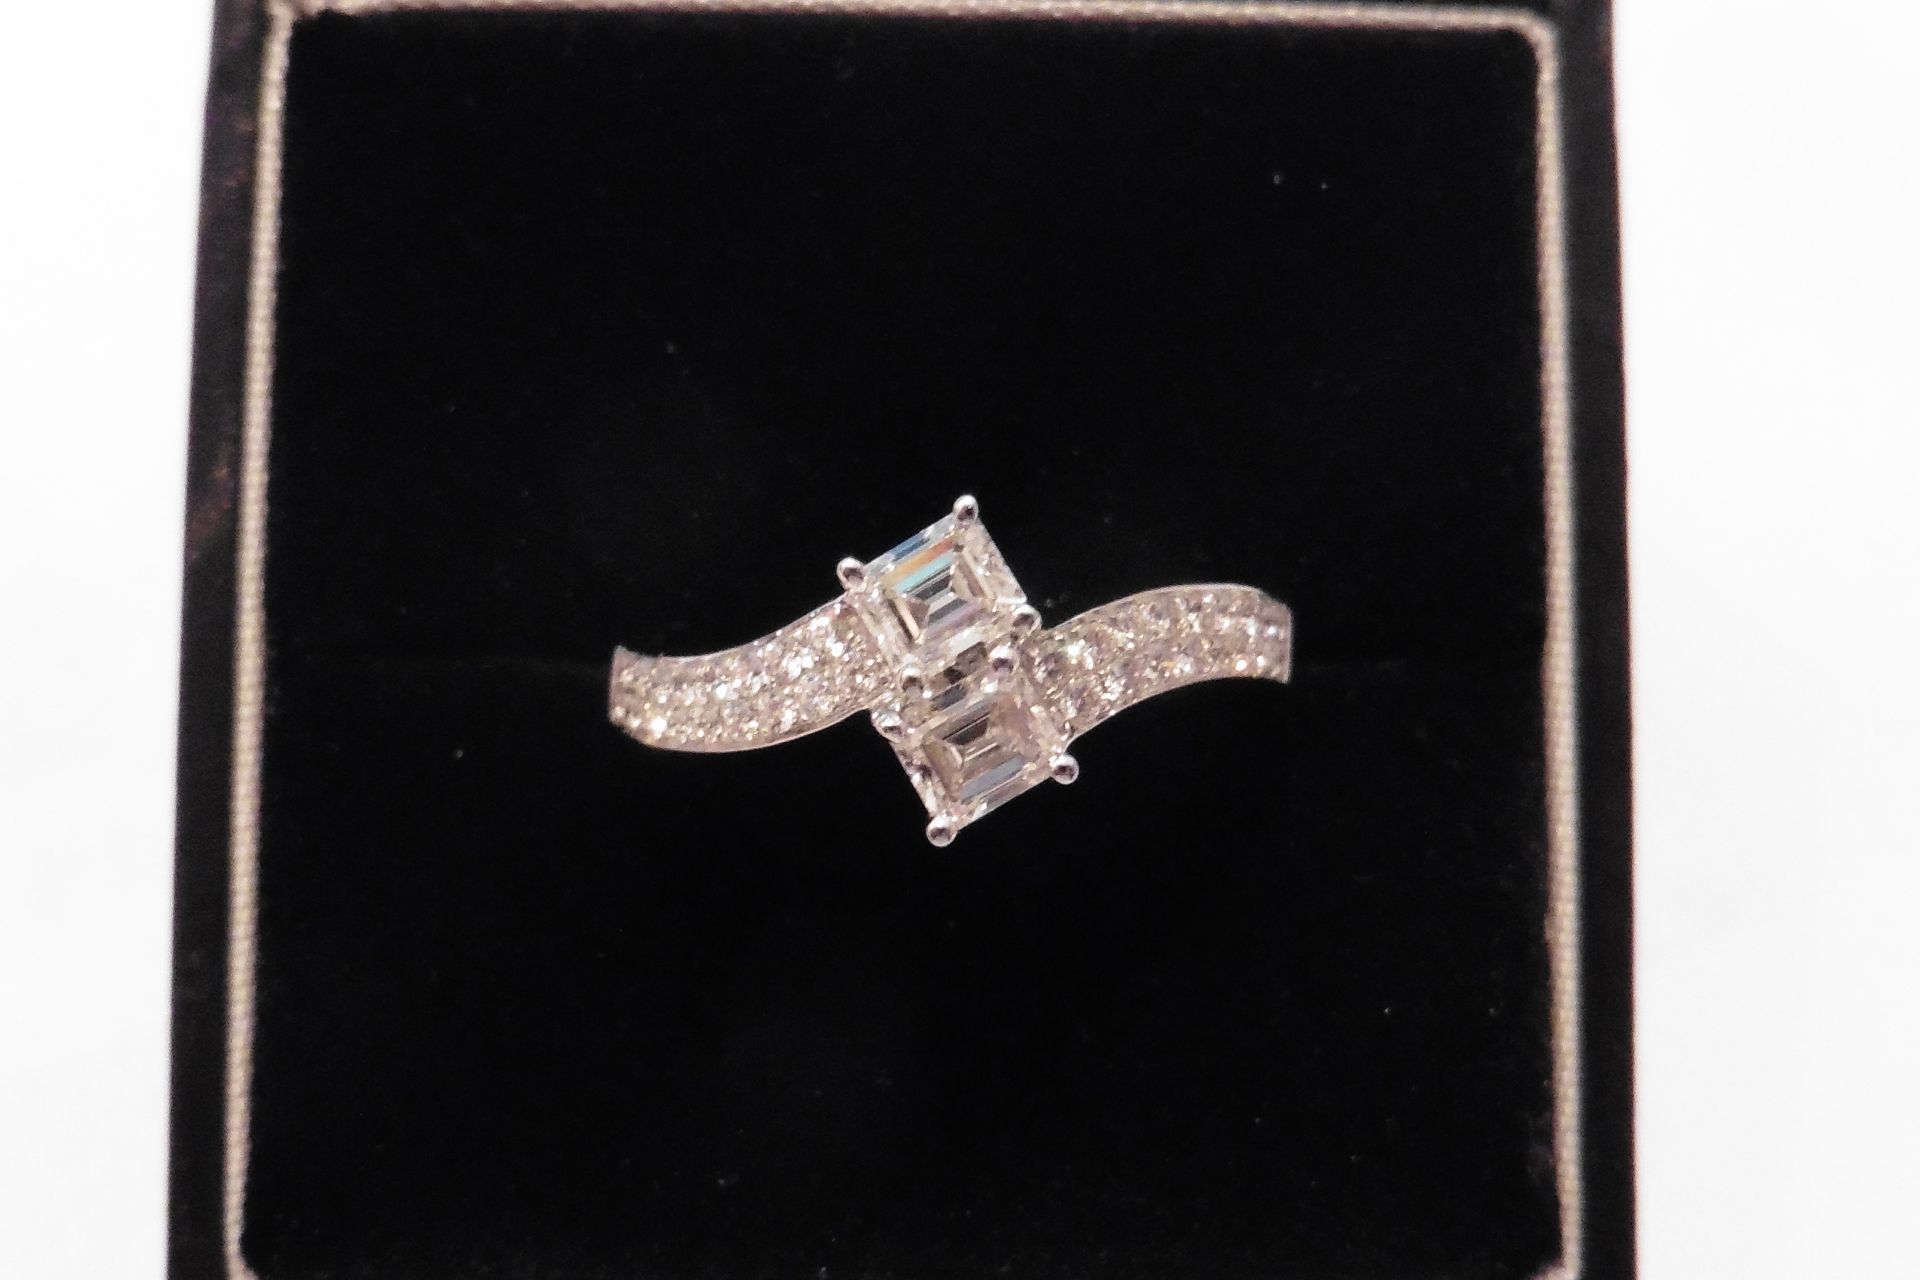 18ct gold diamond twist ring with two emerald cut diamonds in the centre, VS clarity, H colour, weig